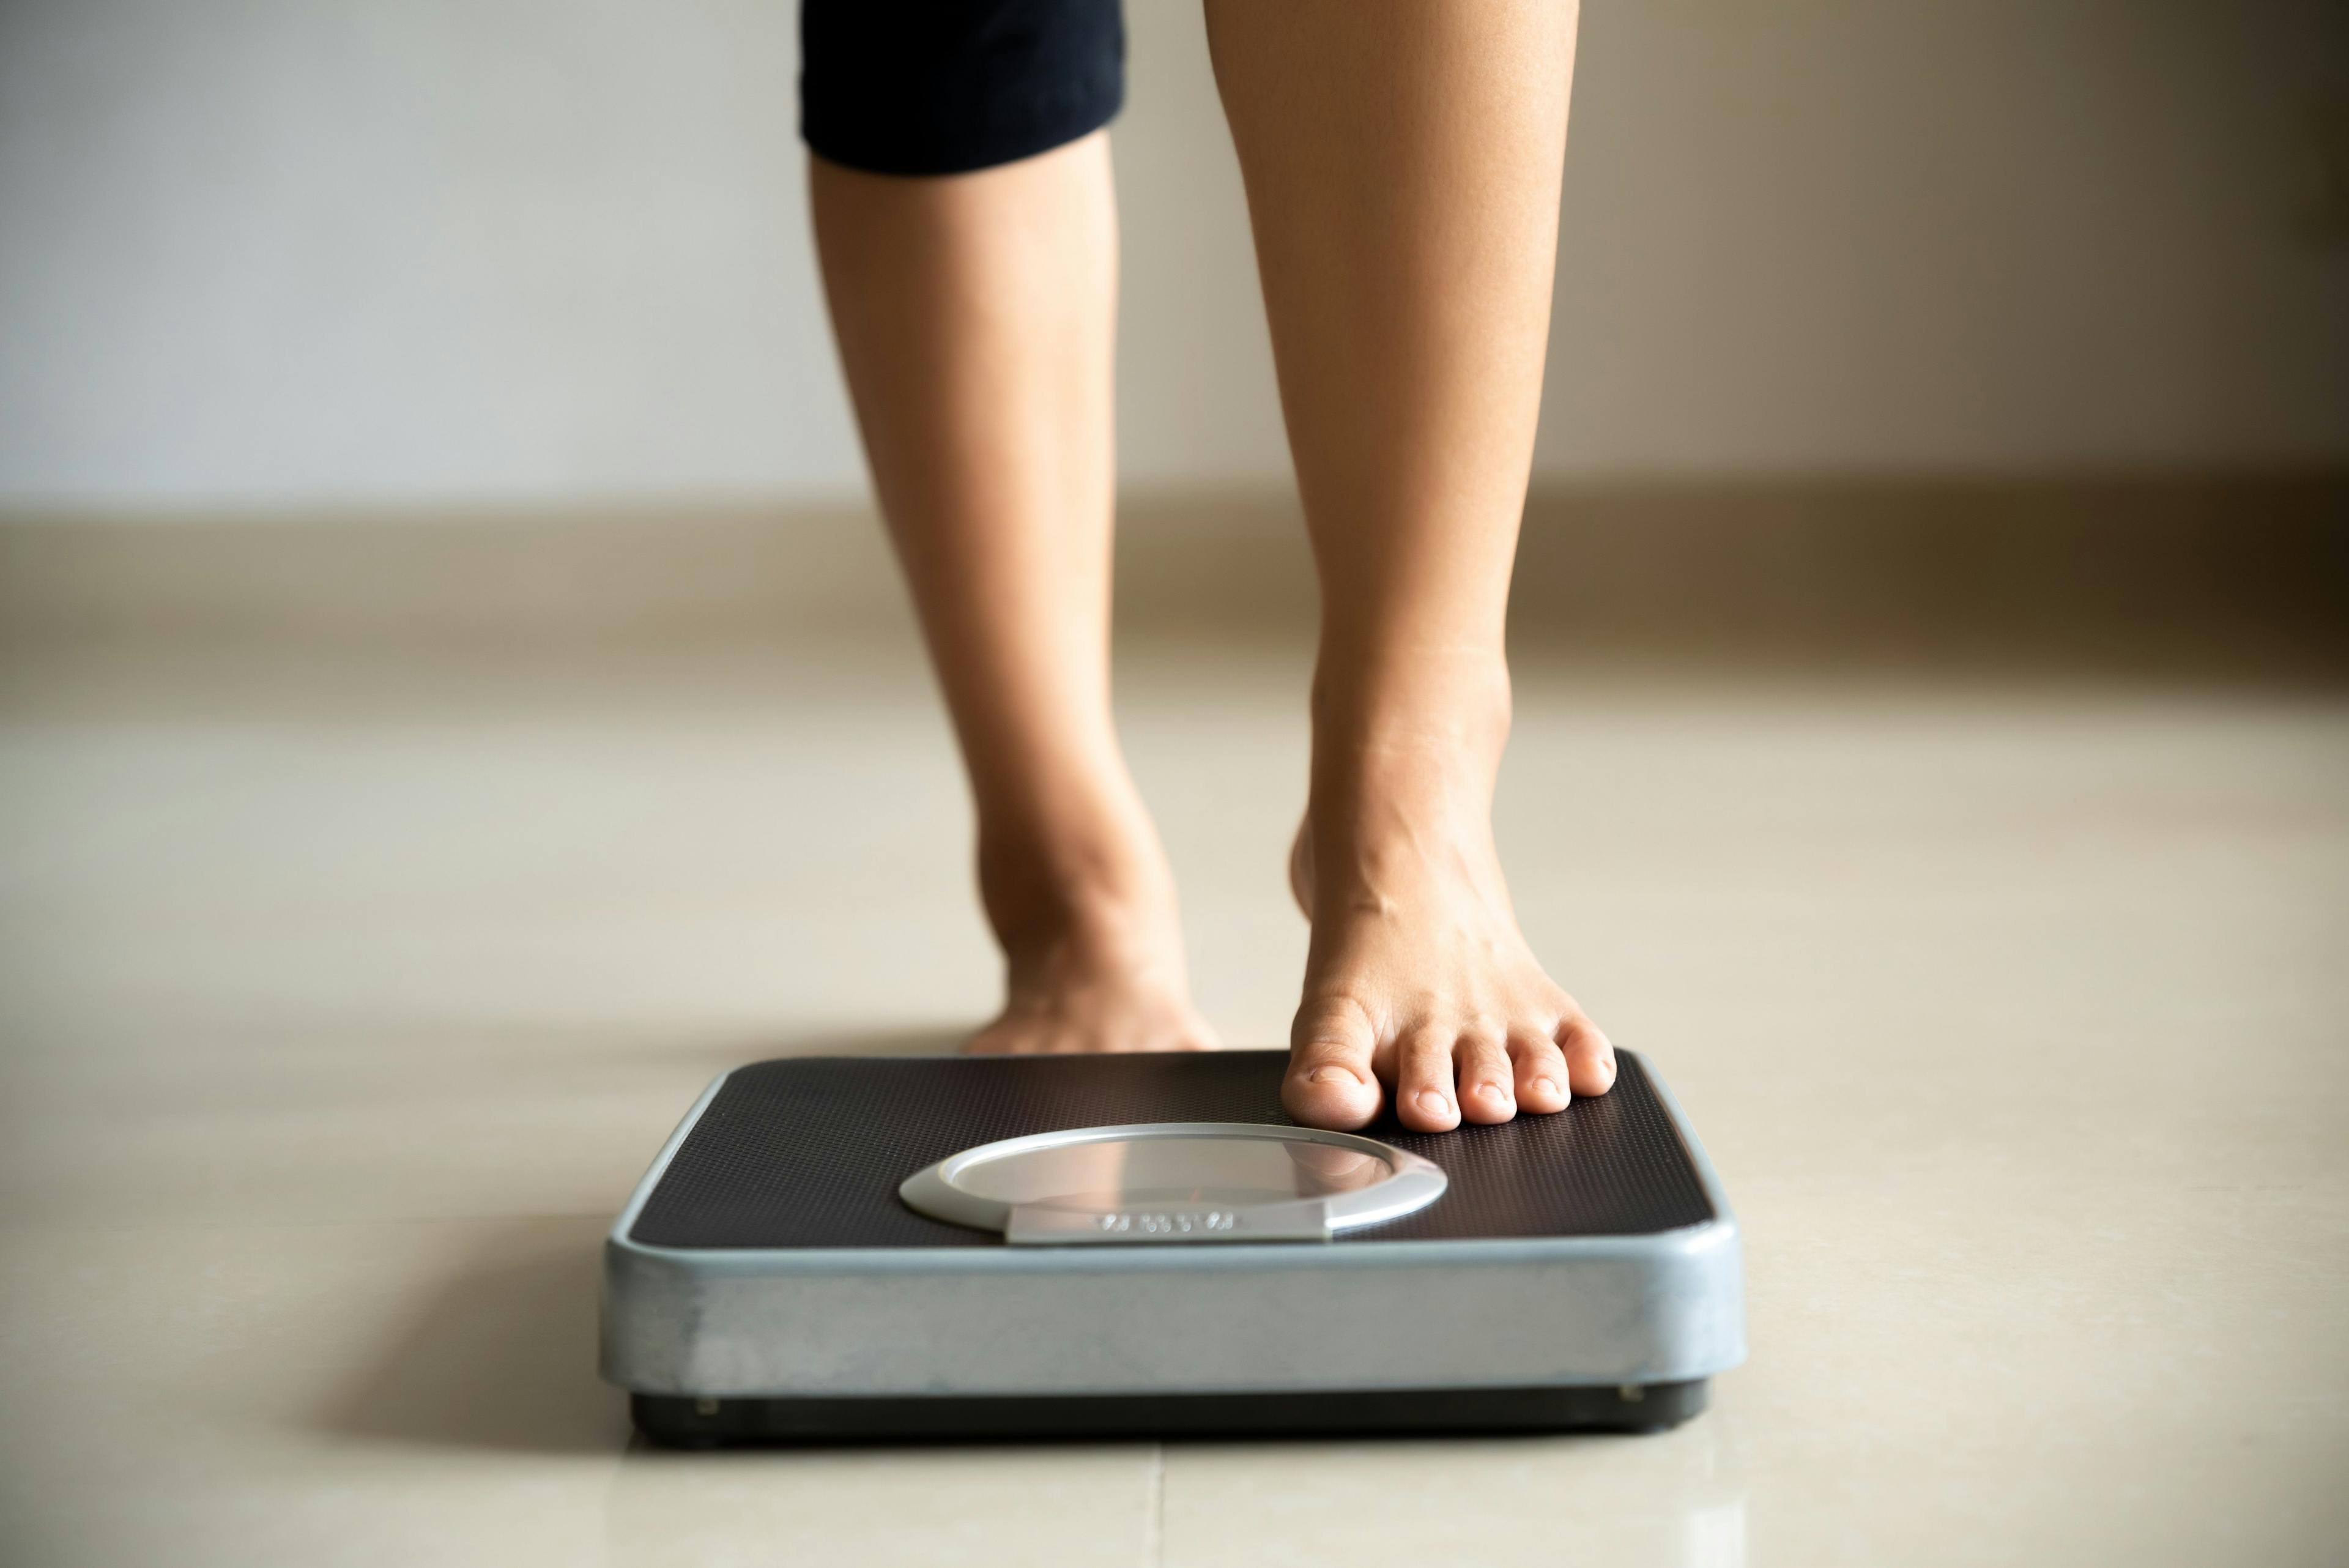 Woman stepping onto an electronic scale -- Image credit: Siam | stock.adobe.com